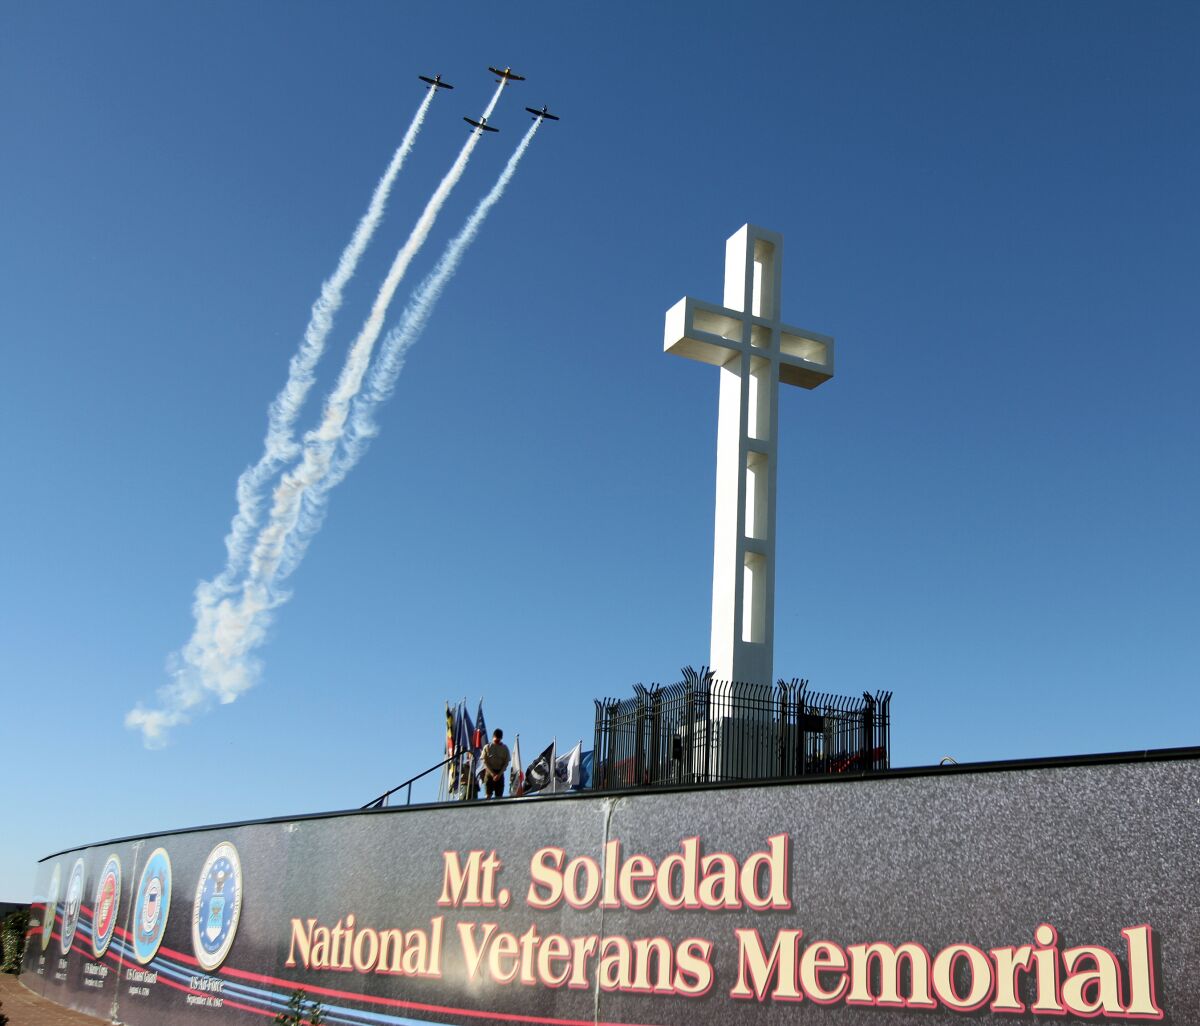 The traditional Mount Soledad National Veterans Memorial event for Memorial Day will be held online Monday, May 25.